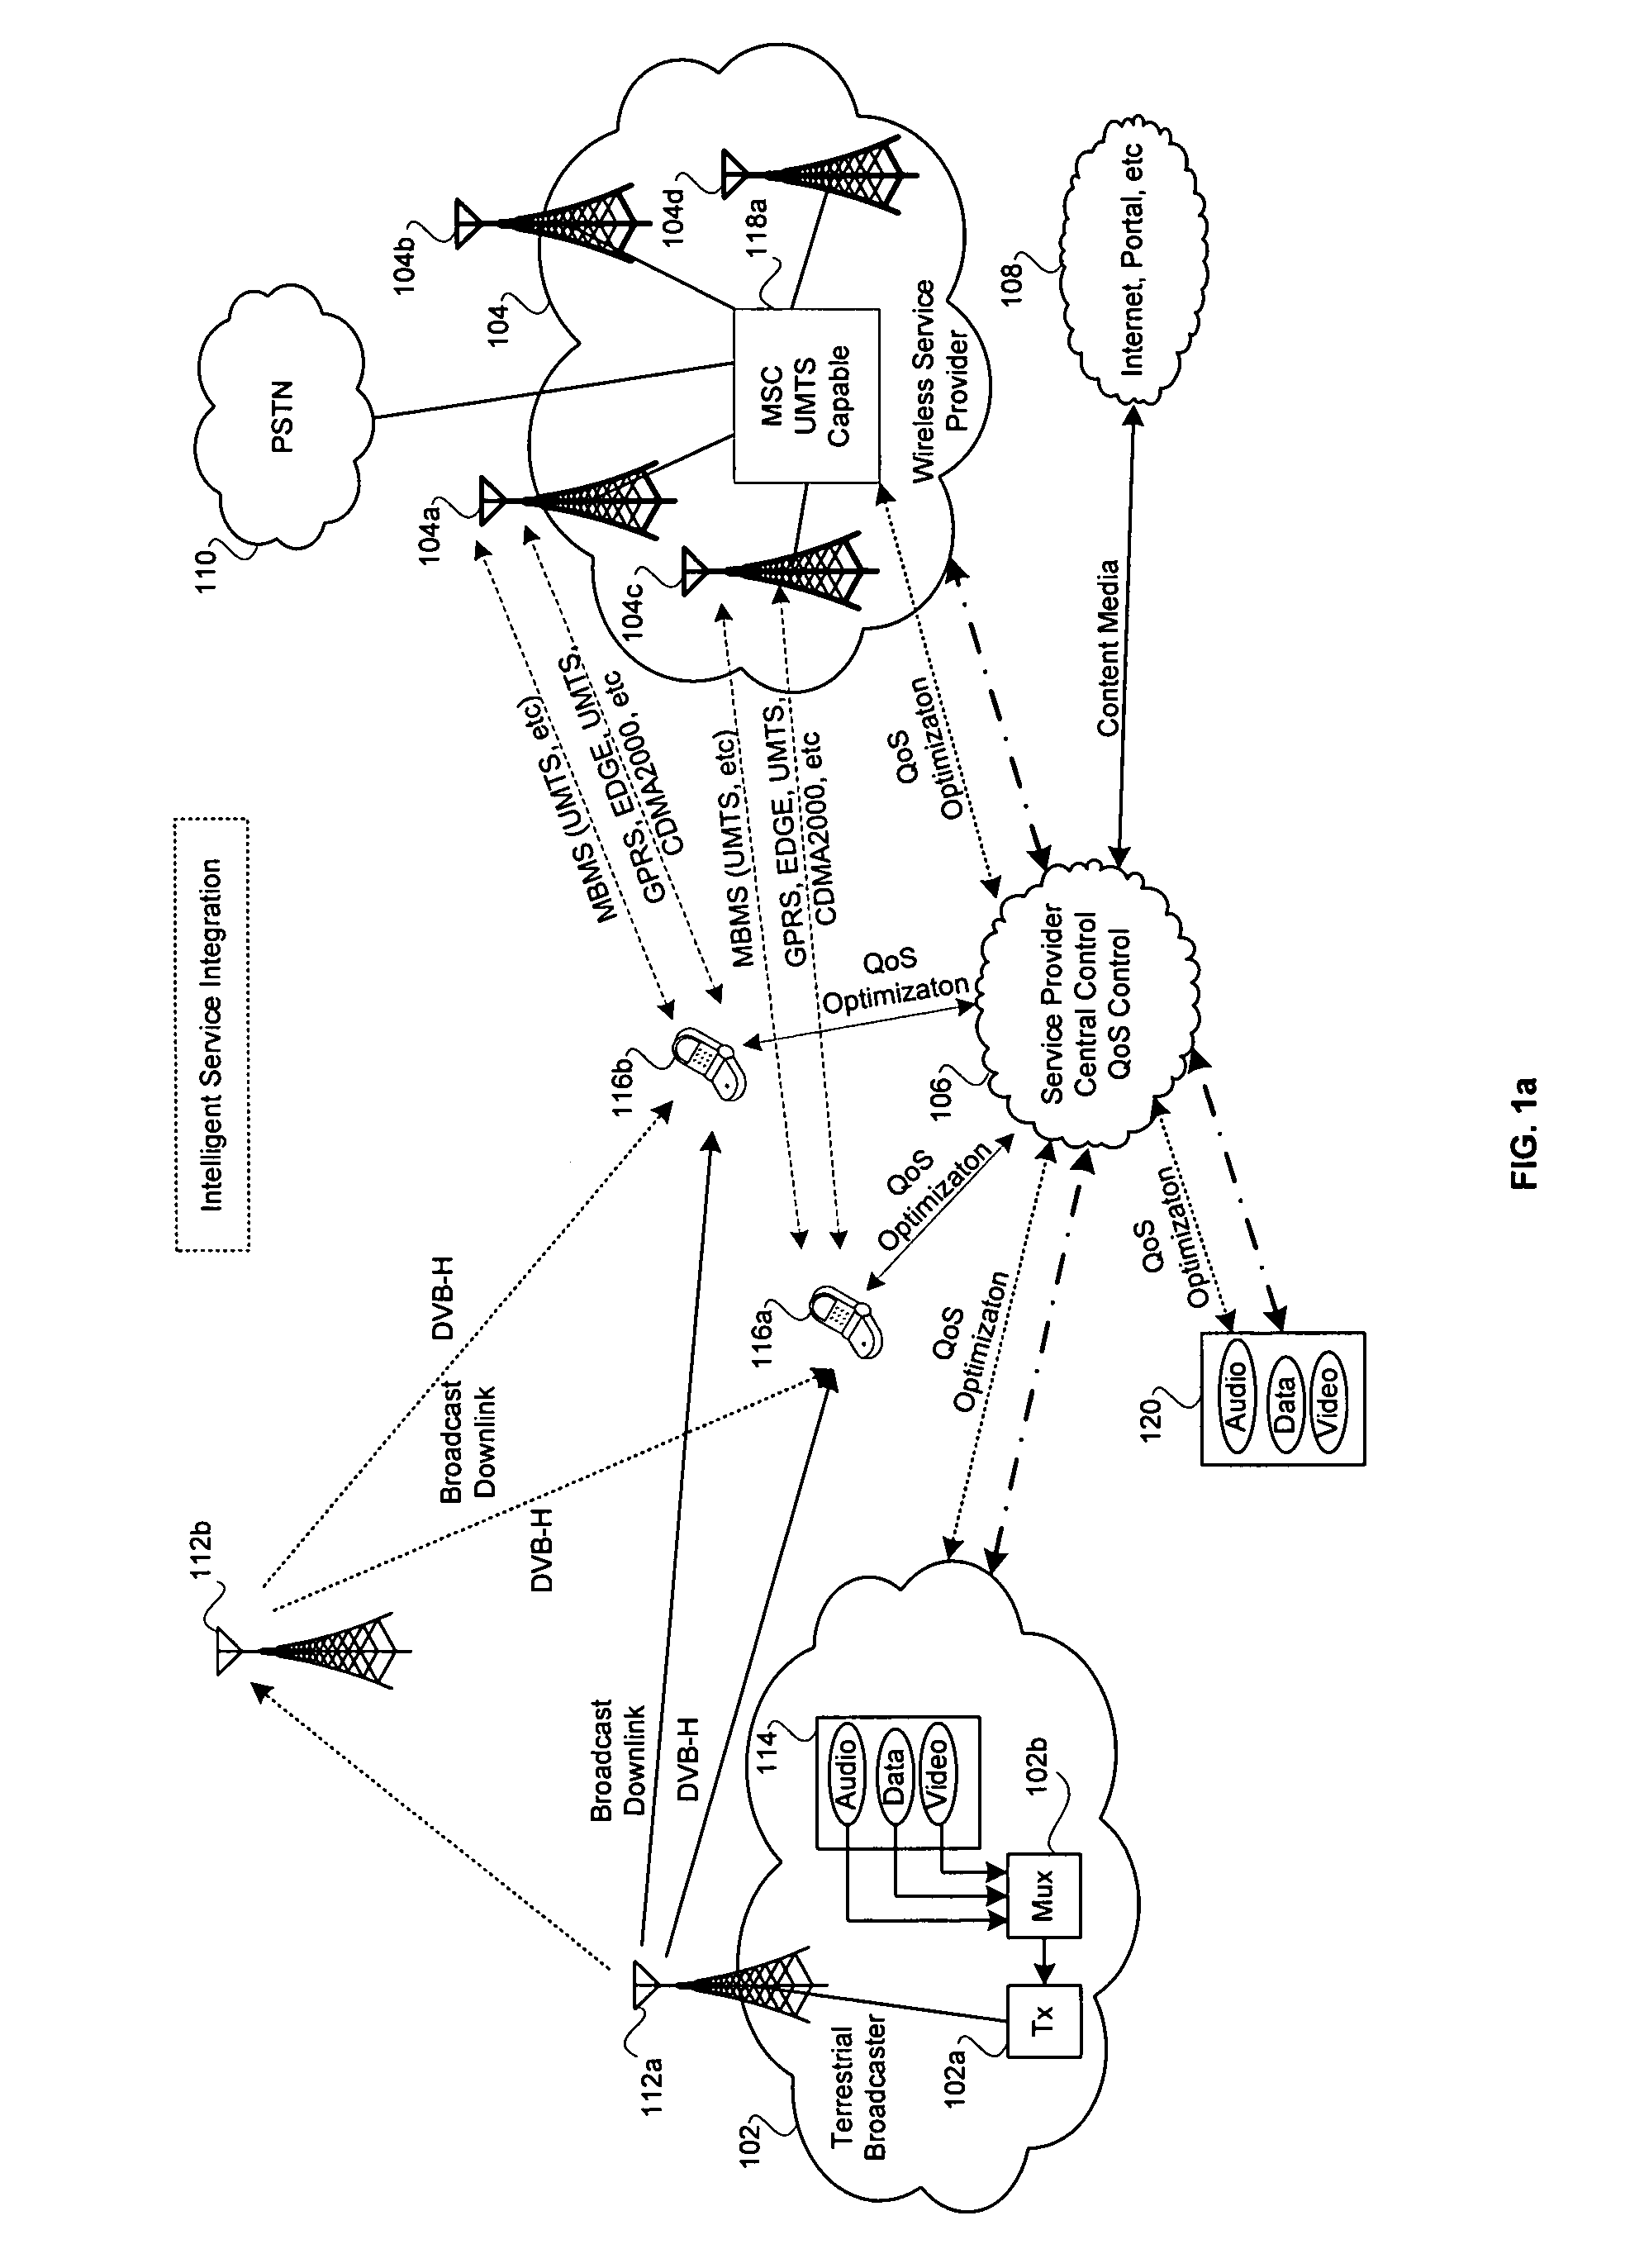 Method and system for cellular network and integrated broadcast television (TV) downlink with intelligent service control